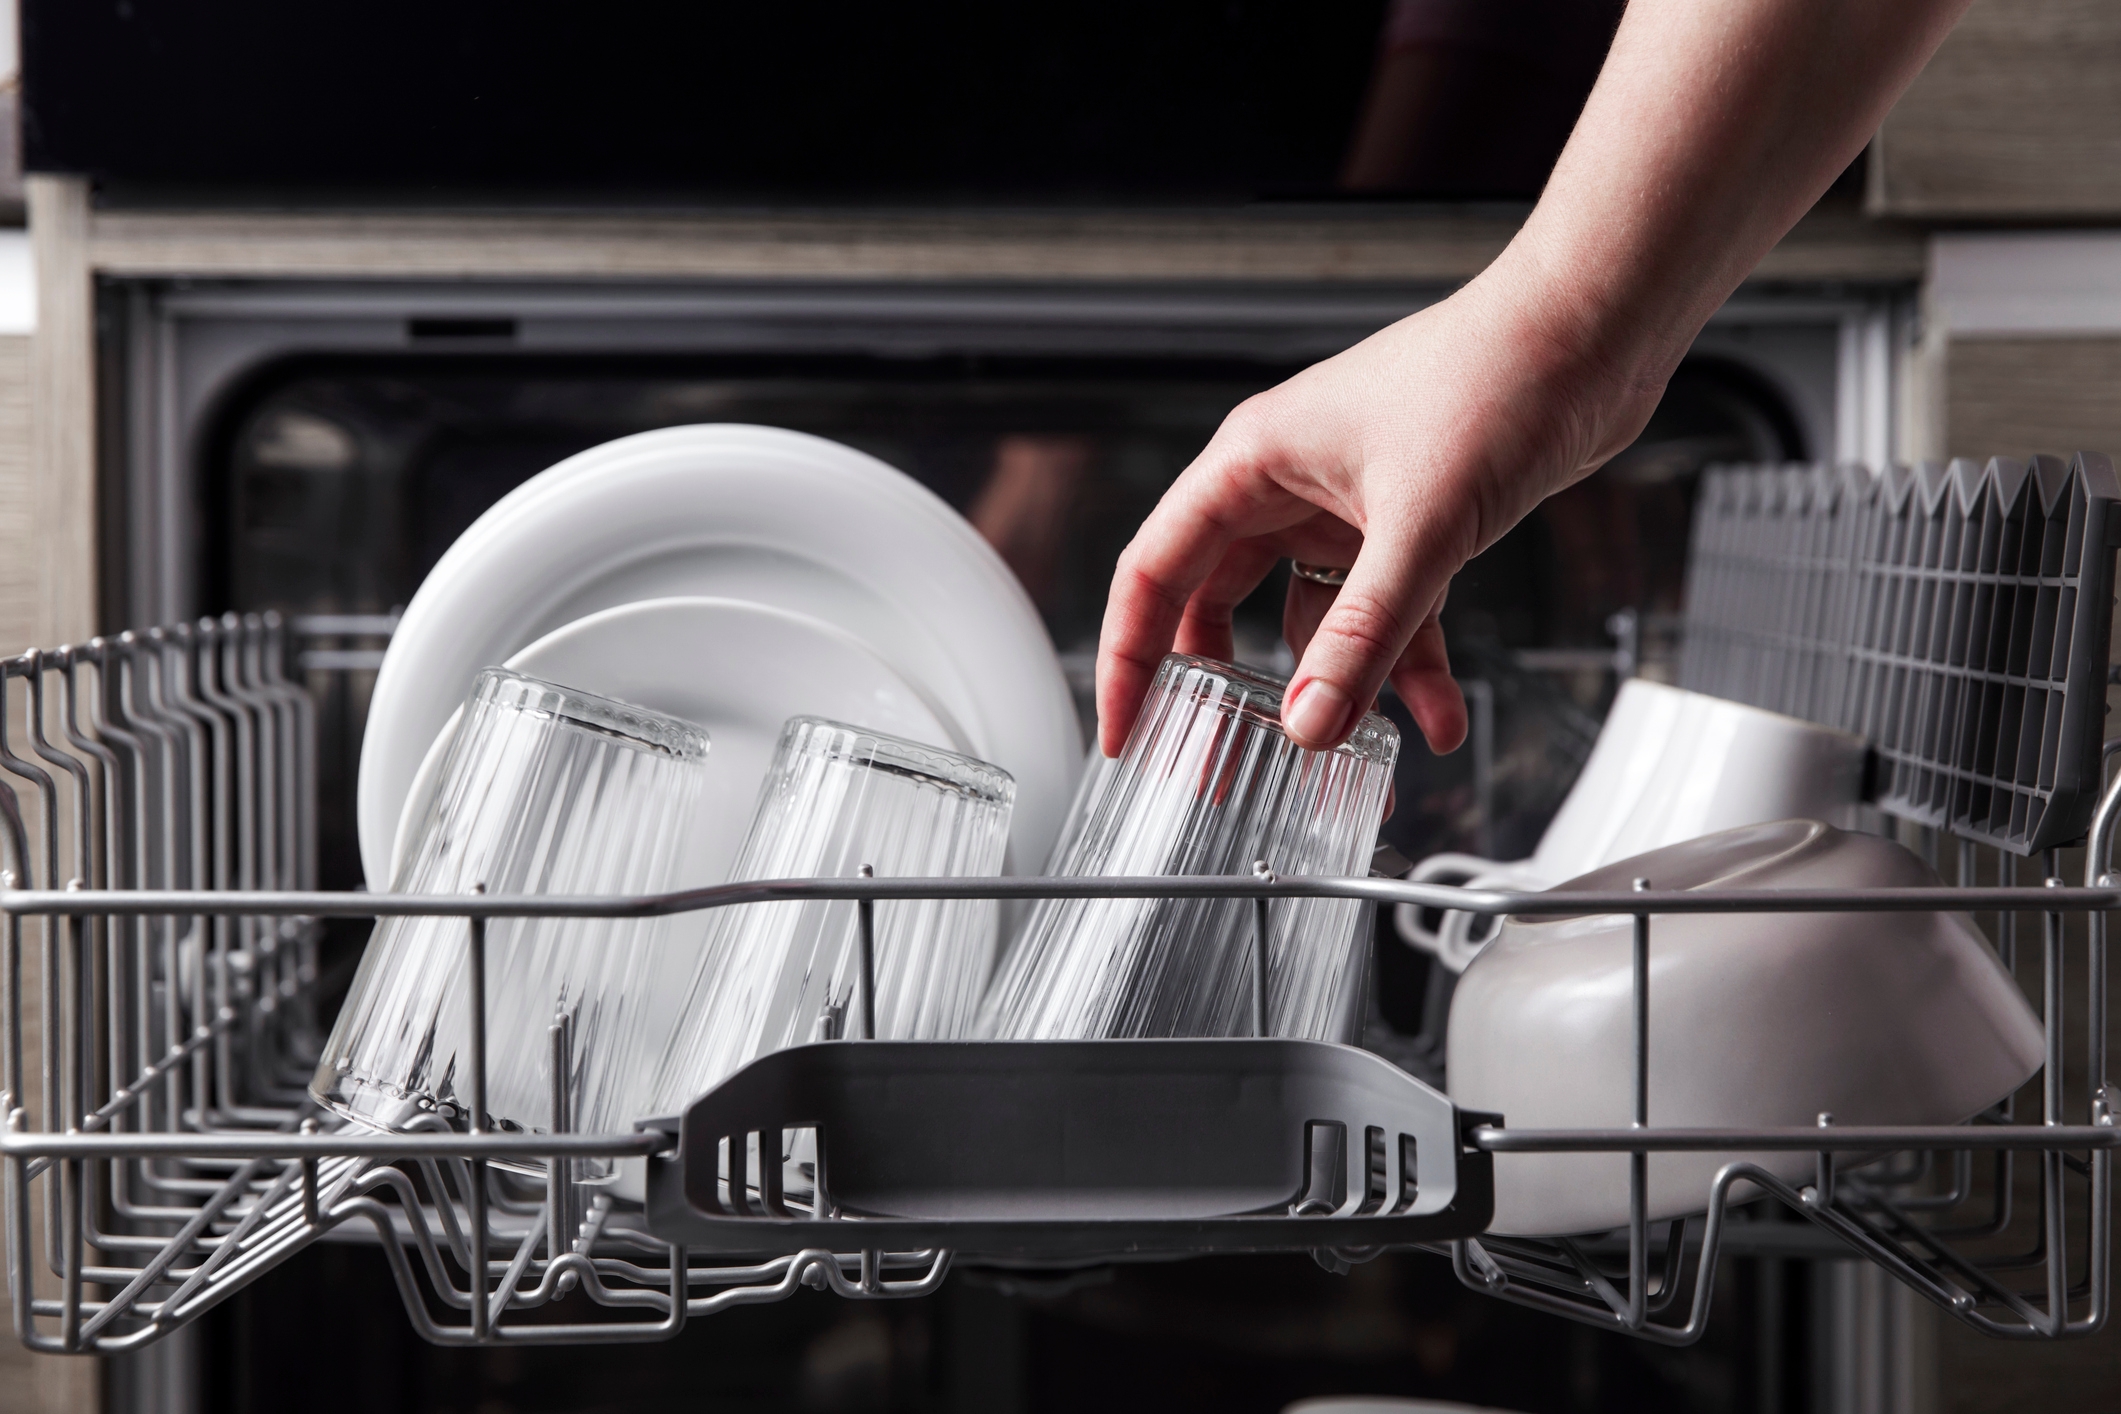 A hand reaching into the top drawer of a dishwasher, picking up a tumbler glass.